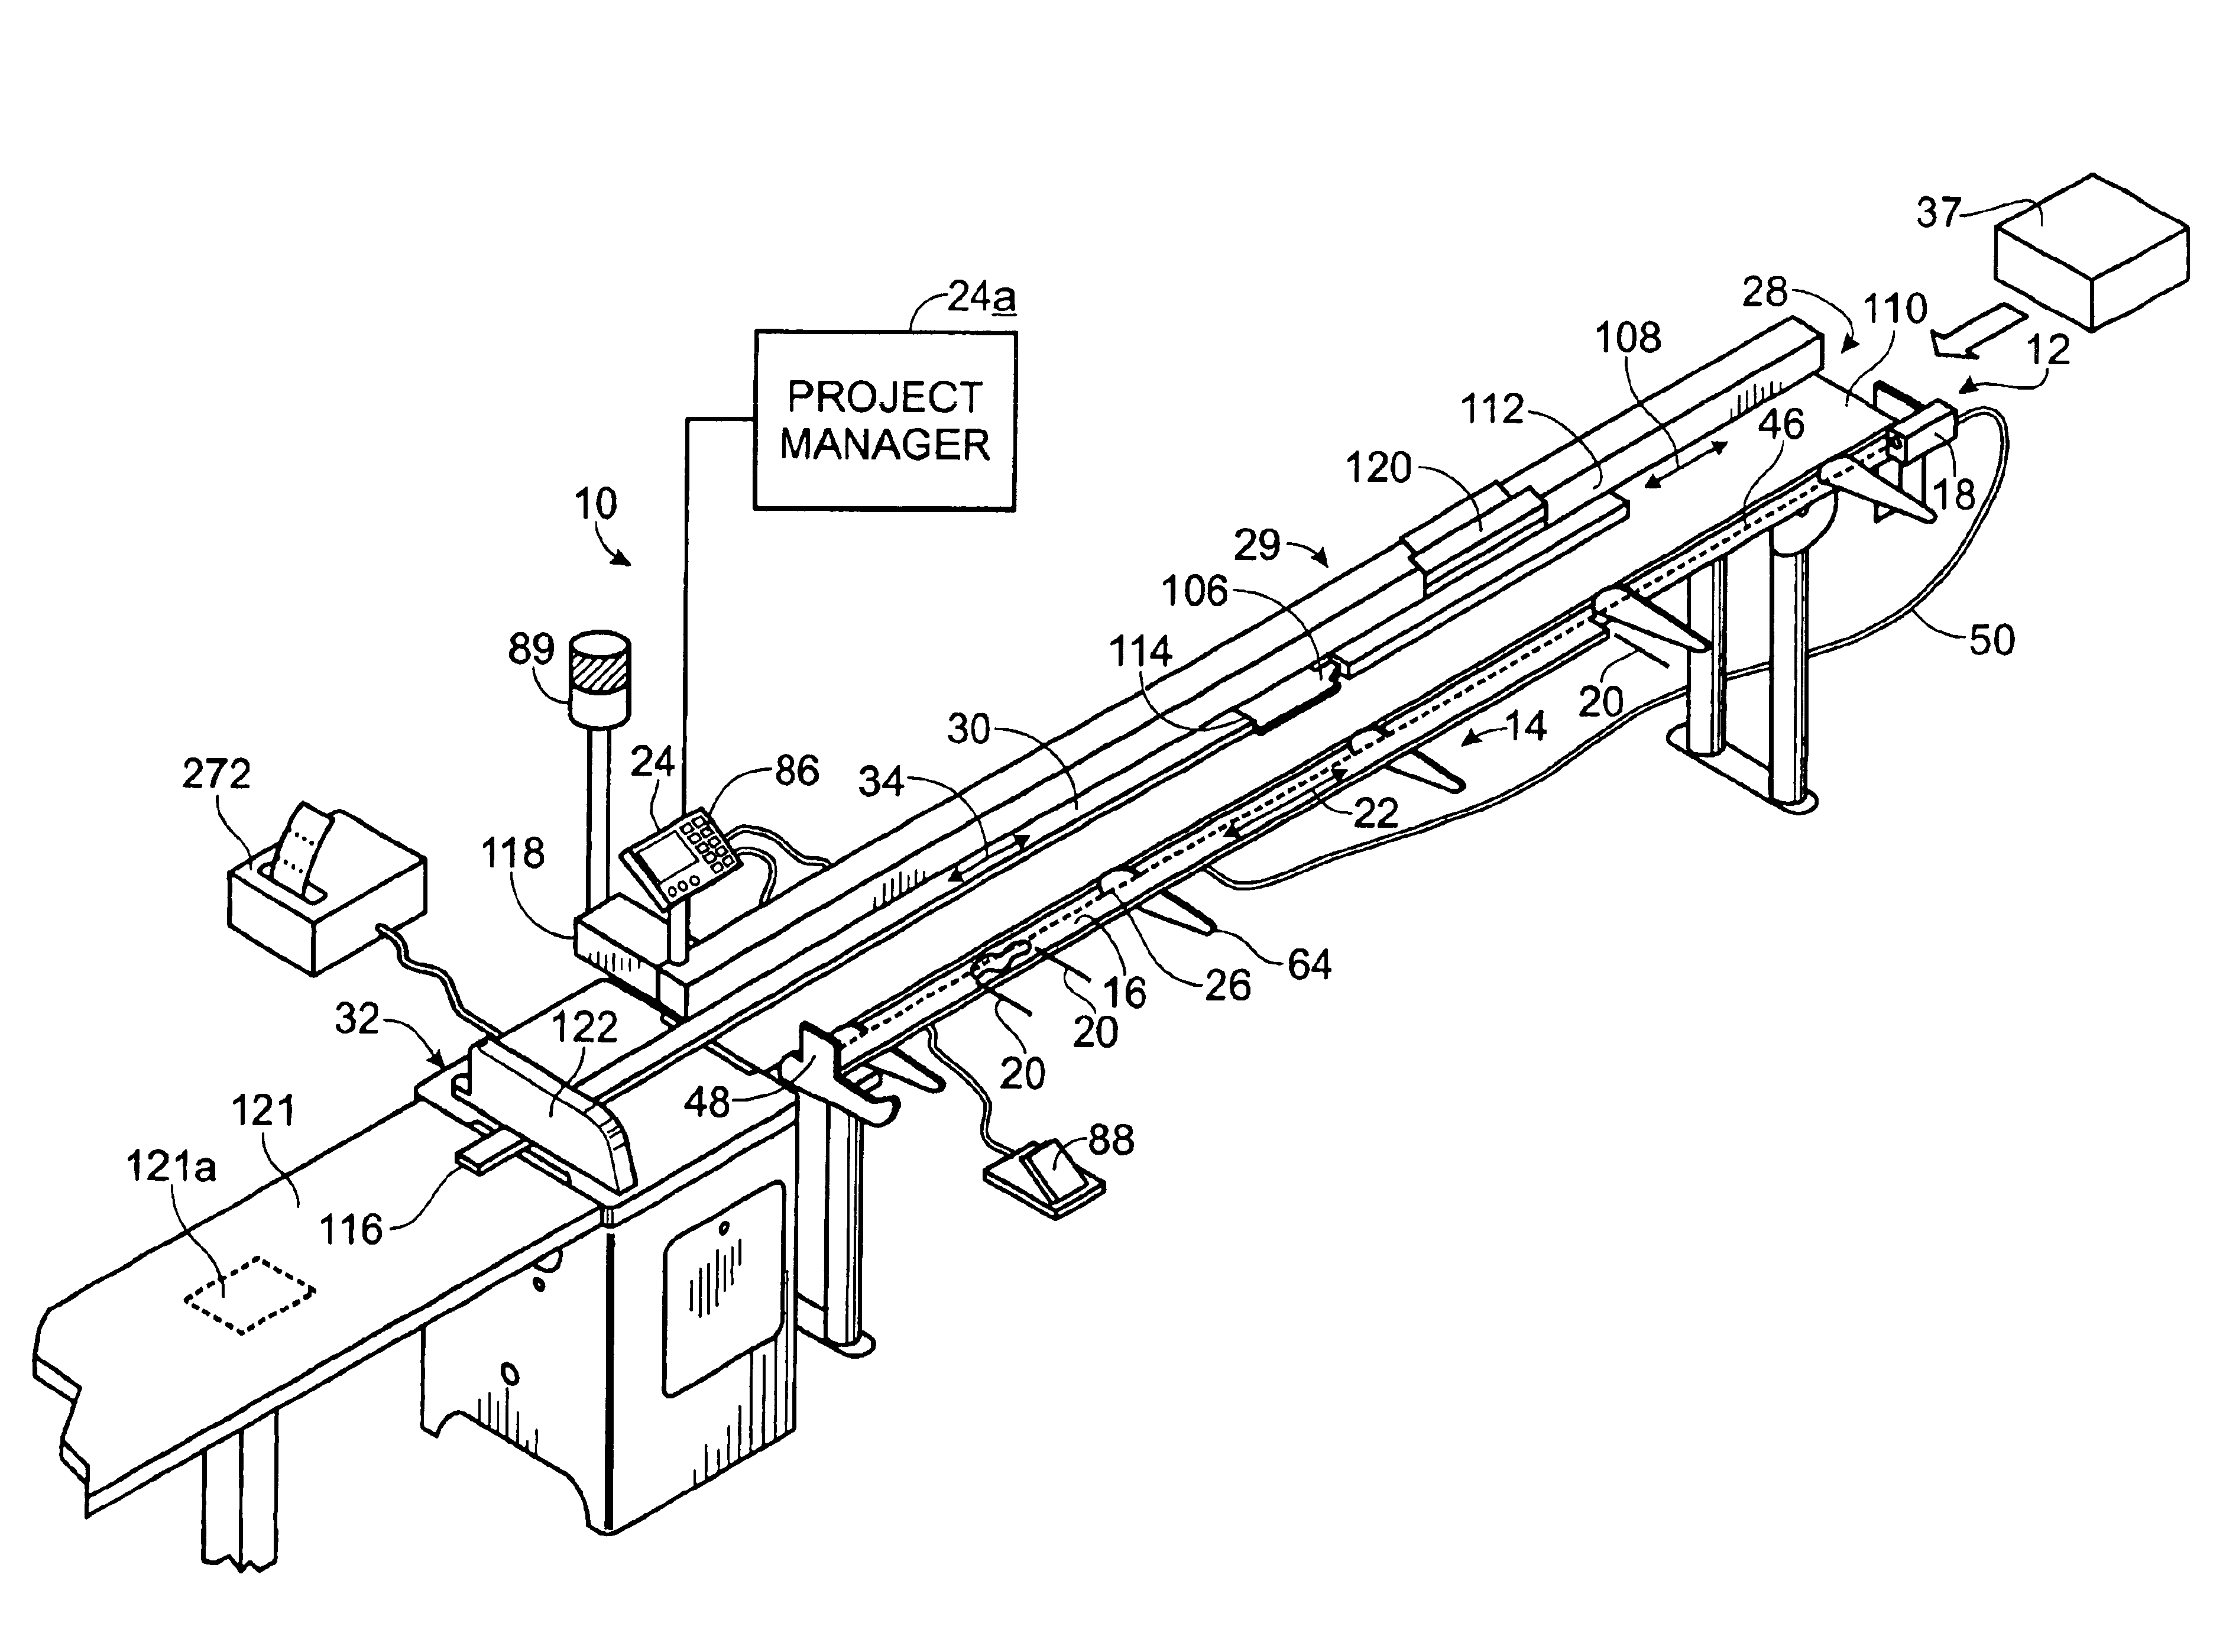 Systems and methods of processing materials